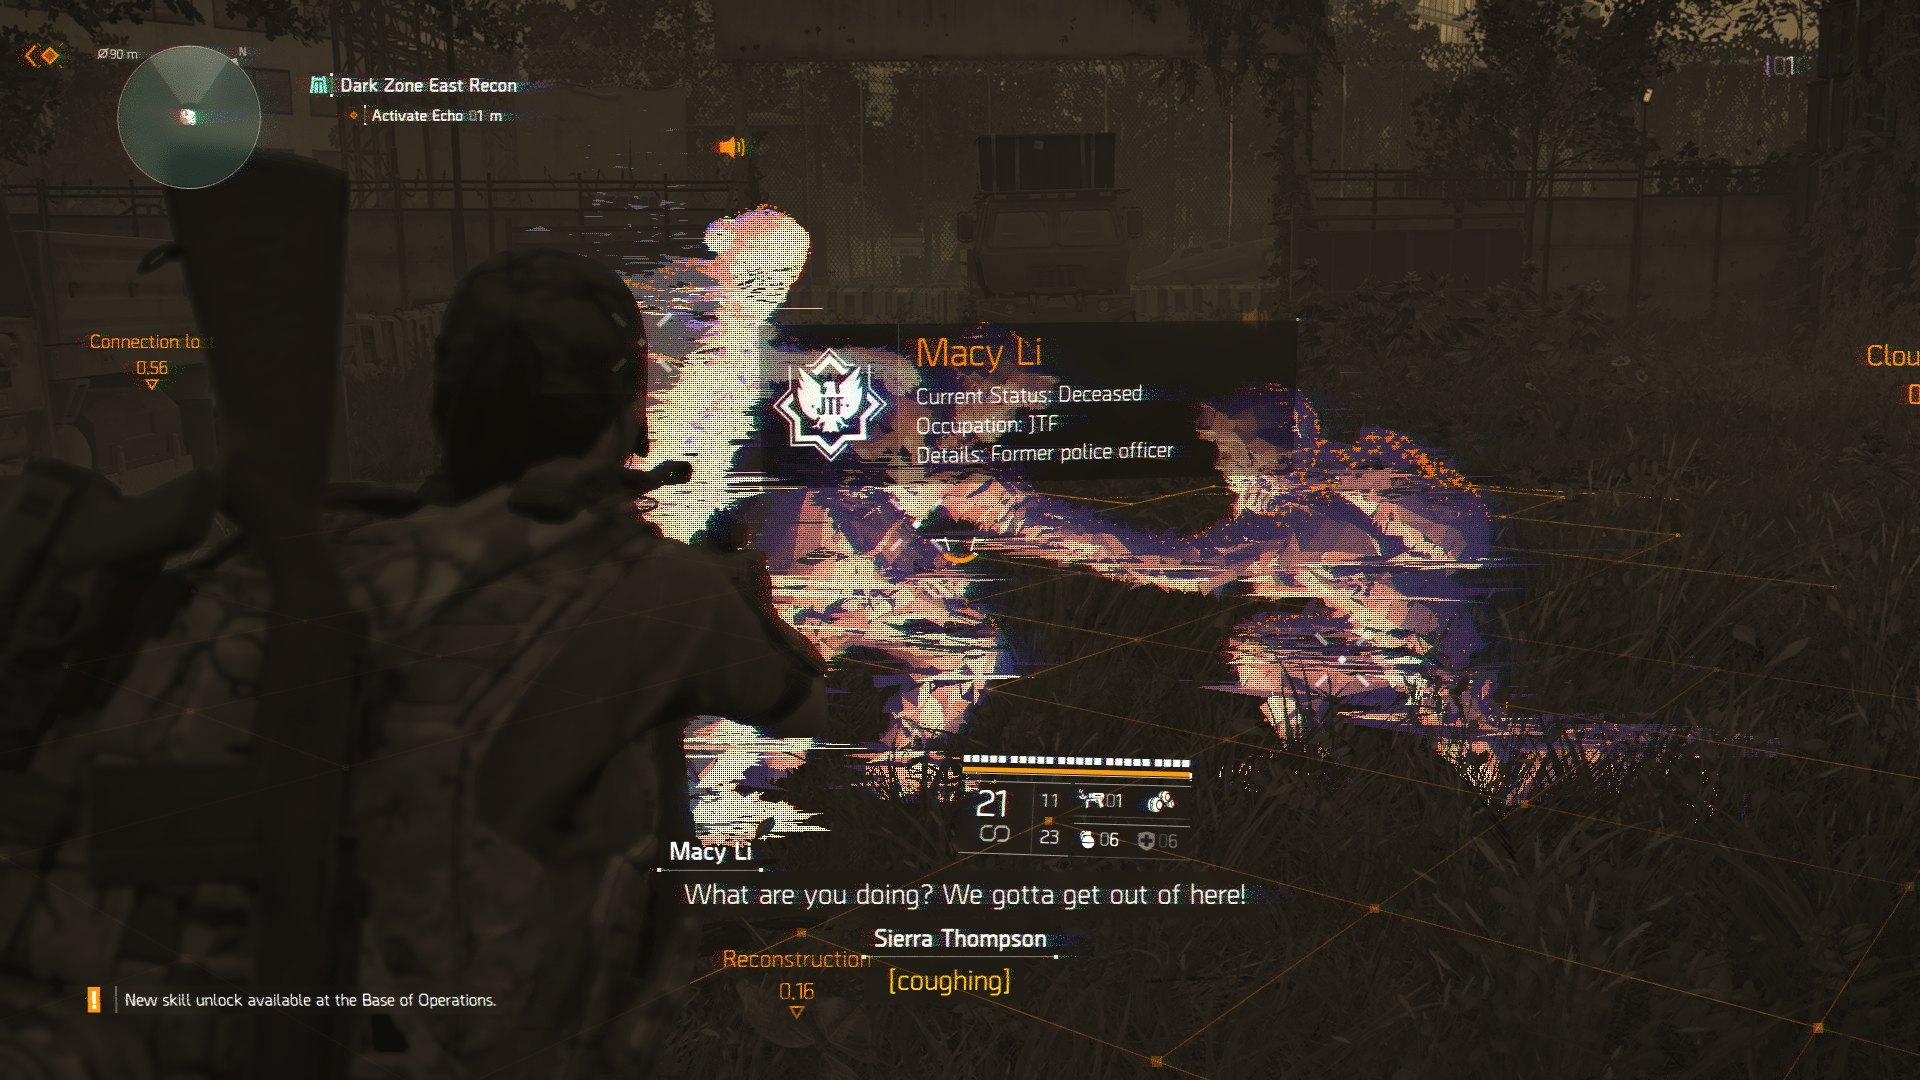 TheDivision2 4 1 2019 7 56 22 PM 66